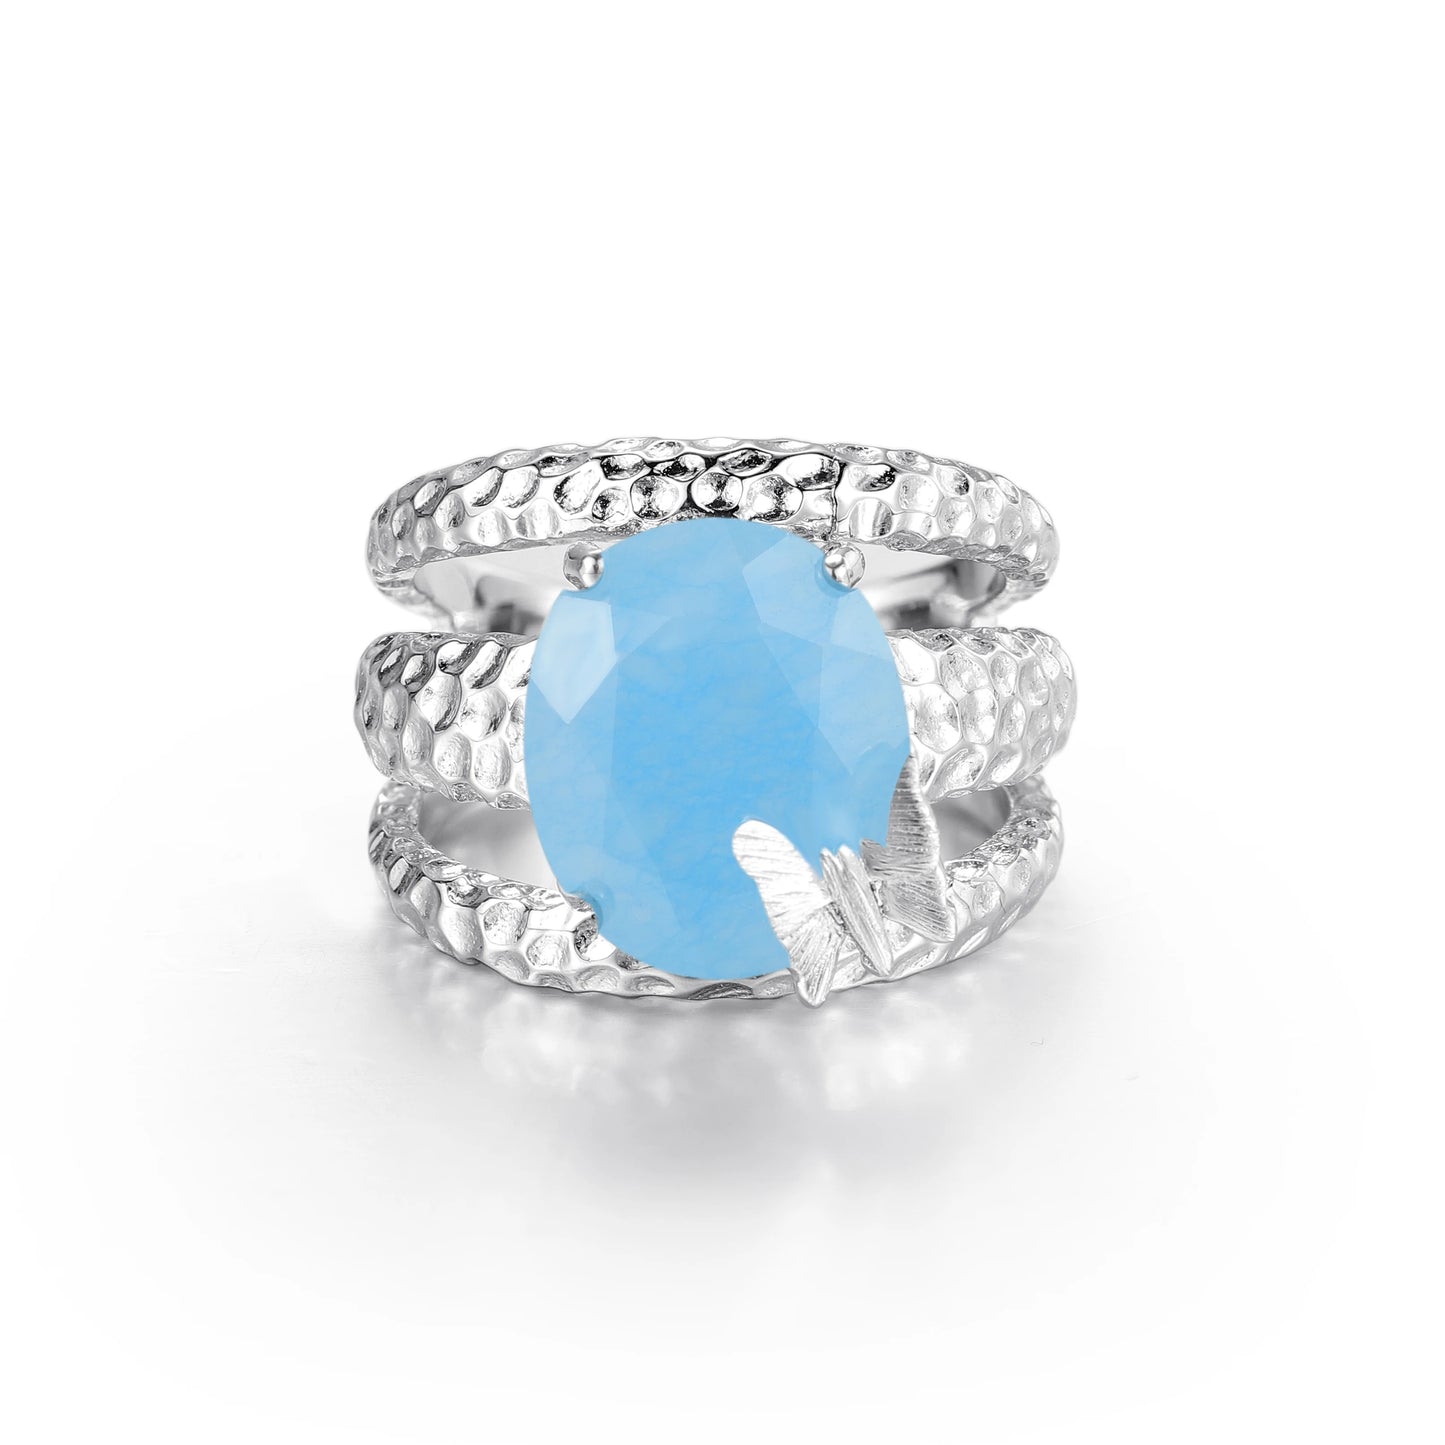 GEM'S BALLET Natural Aqua-blue Calcedony Gemstone Statement Ring Boho Sterling Silver Butterfly Ring Fine Jewelry Gift For Mom Aqua-blue Calcedony CHINA